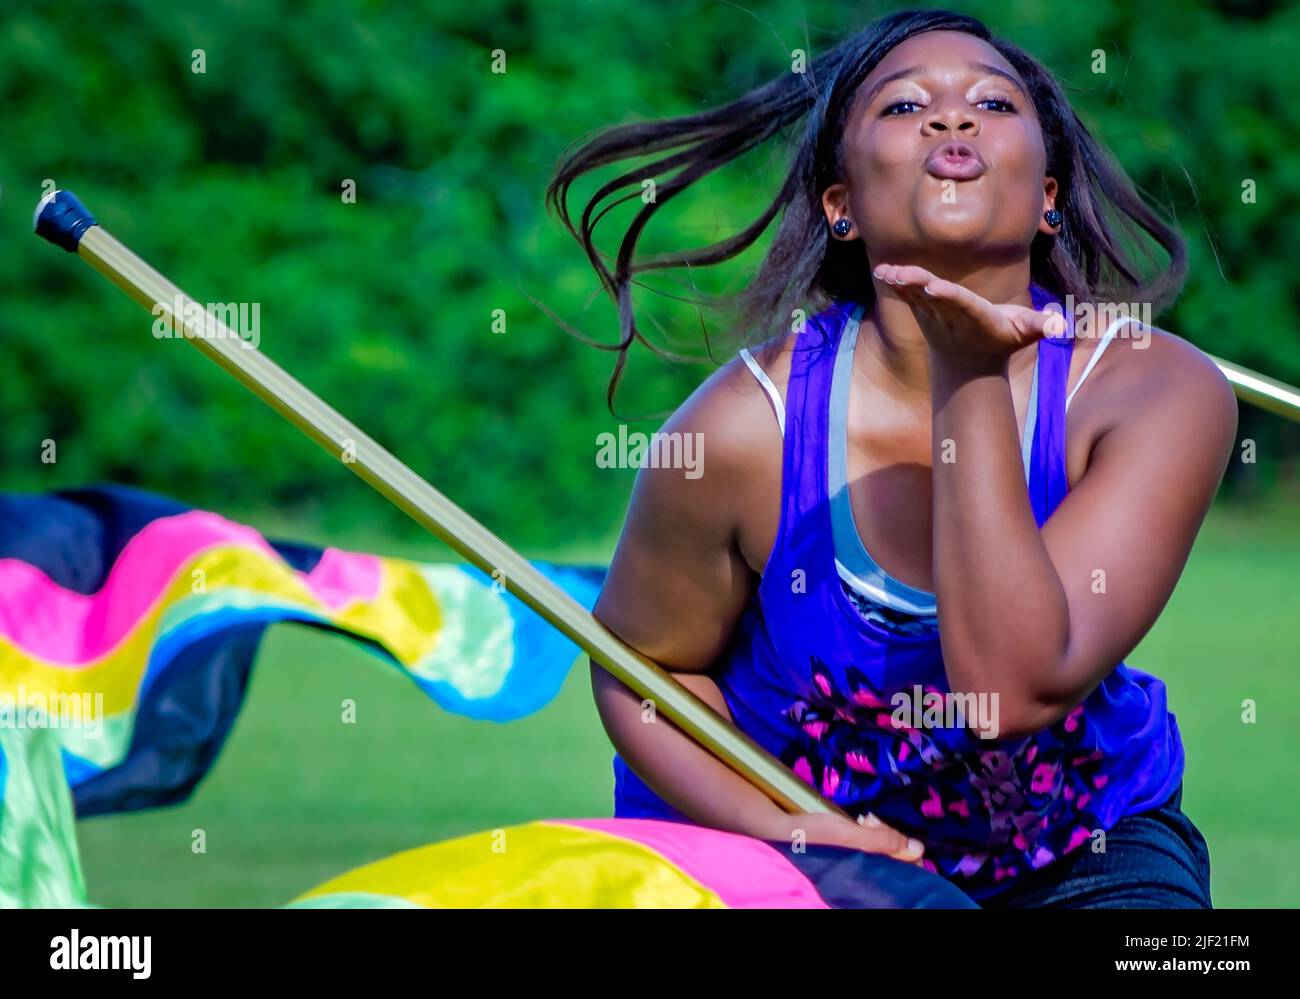 A member of the Columbus High School color guard blows a kiss at the end of her routine during band practice, Aug. 16, 2012, in Columbus, Mississippi. Stock Photo